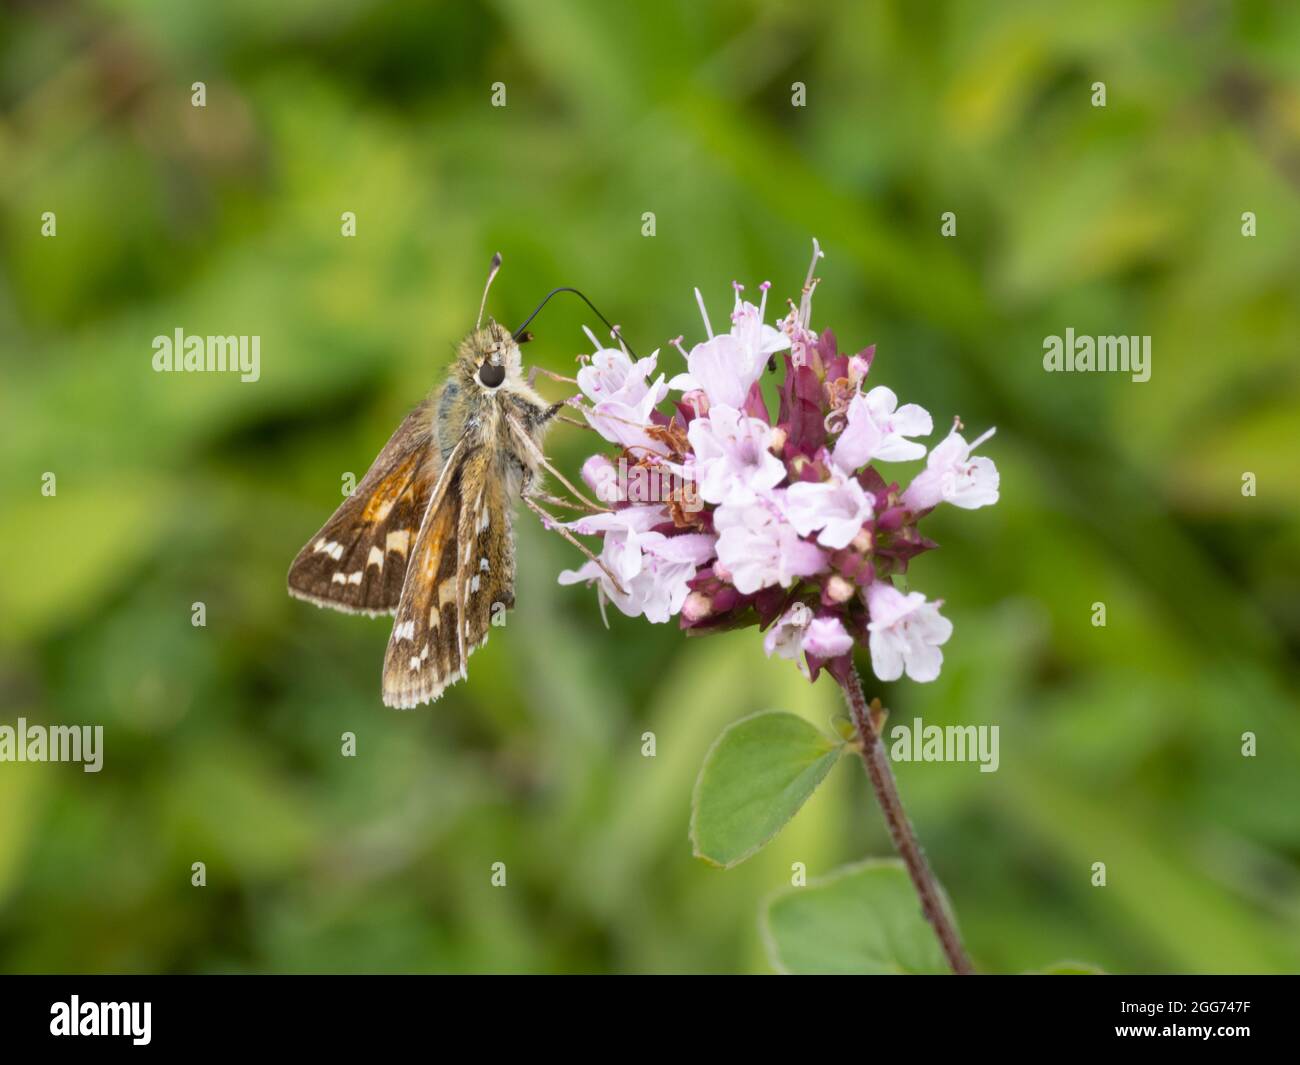 Epargyreus clarus, a Silver-spotted Skipper Butterfly perched on a Marjoram flower. Stock Photo